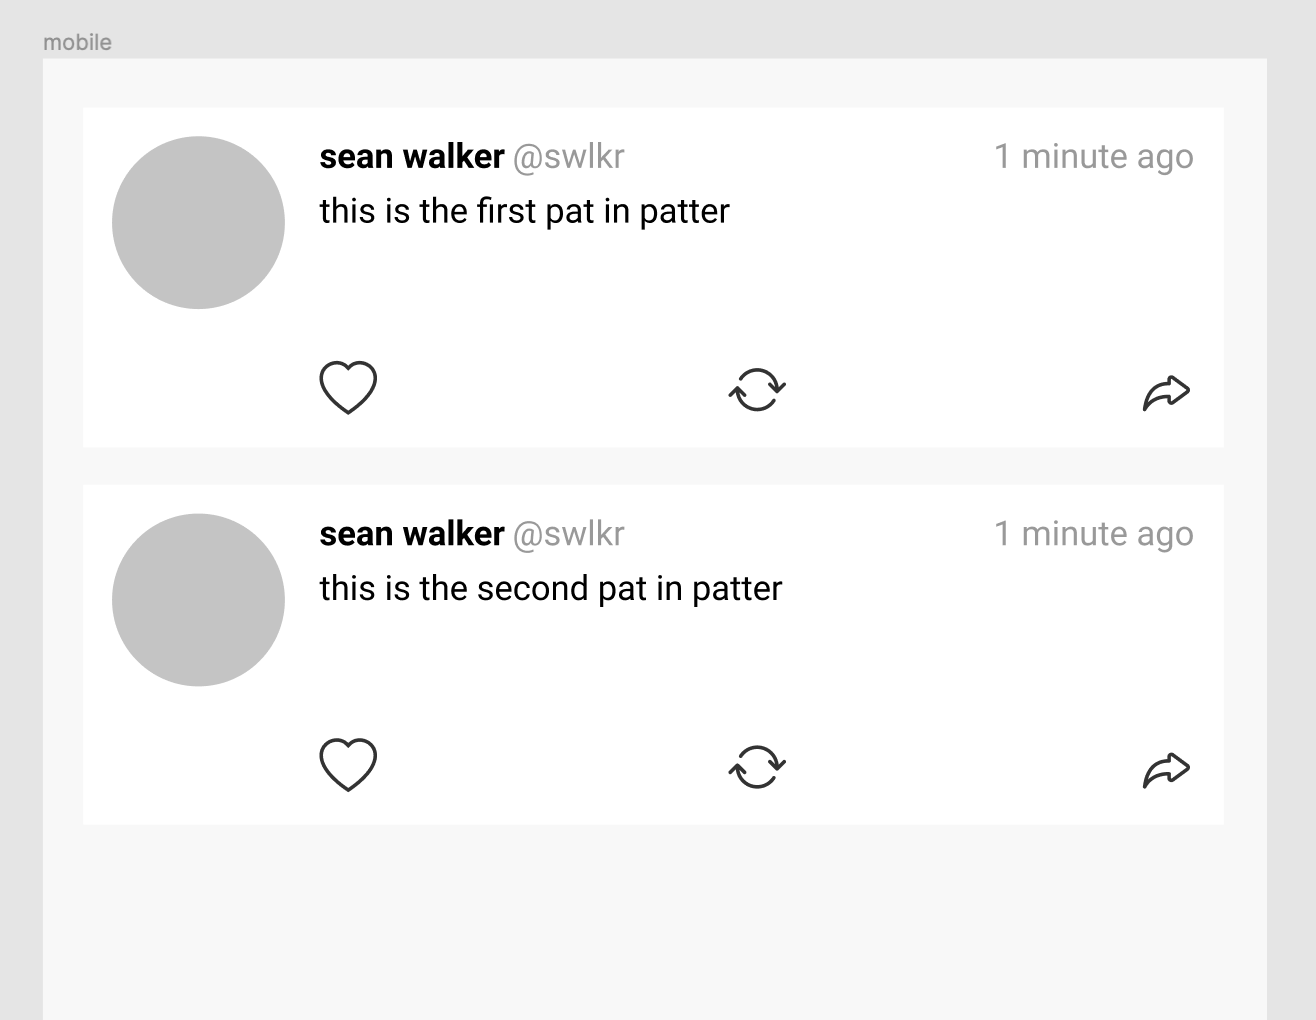 a poorly made clone of twitter’s timeline with two posts saying “this is the first pat in patter” and “this is the second pat in patter”